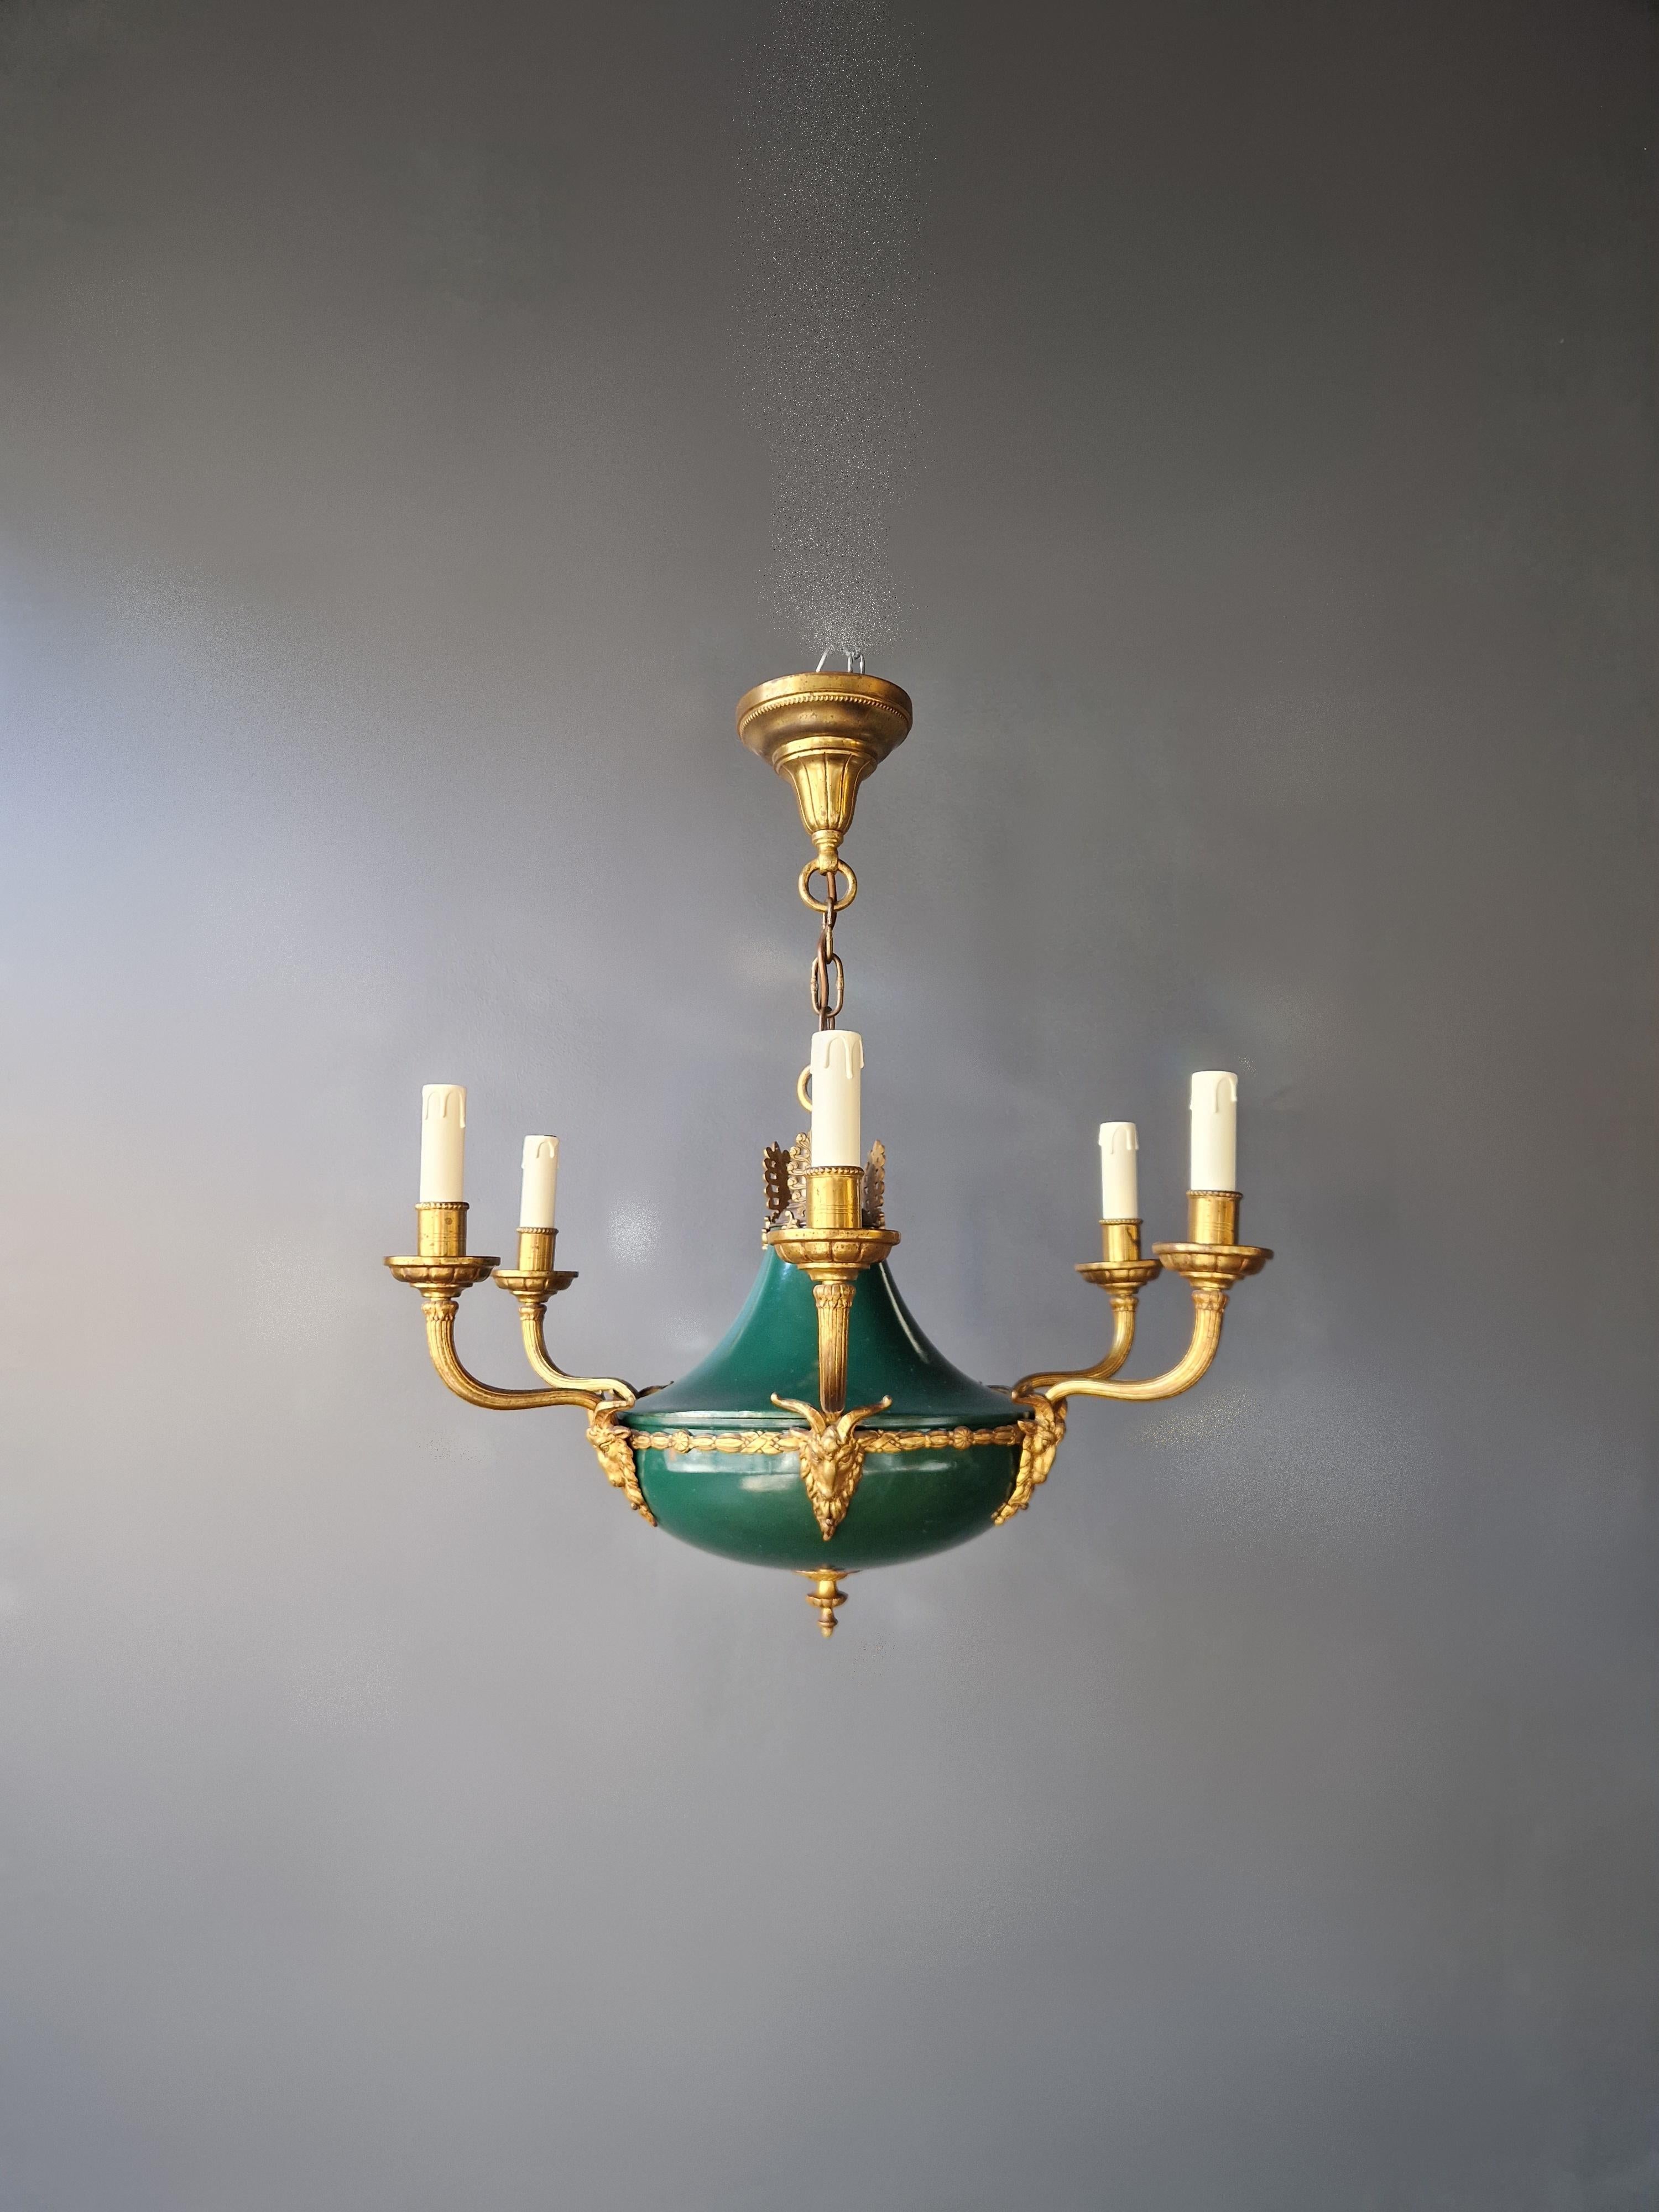 German Gilt Antique Empire Lustre Neoclassical Patina Green Brass Chandelier For Sale